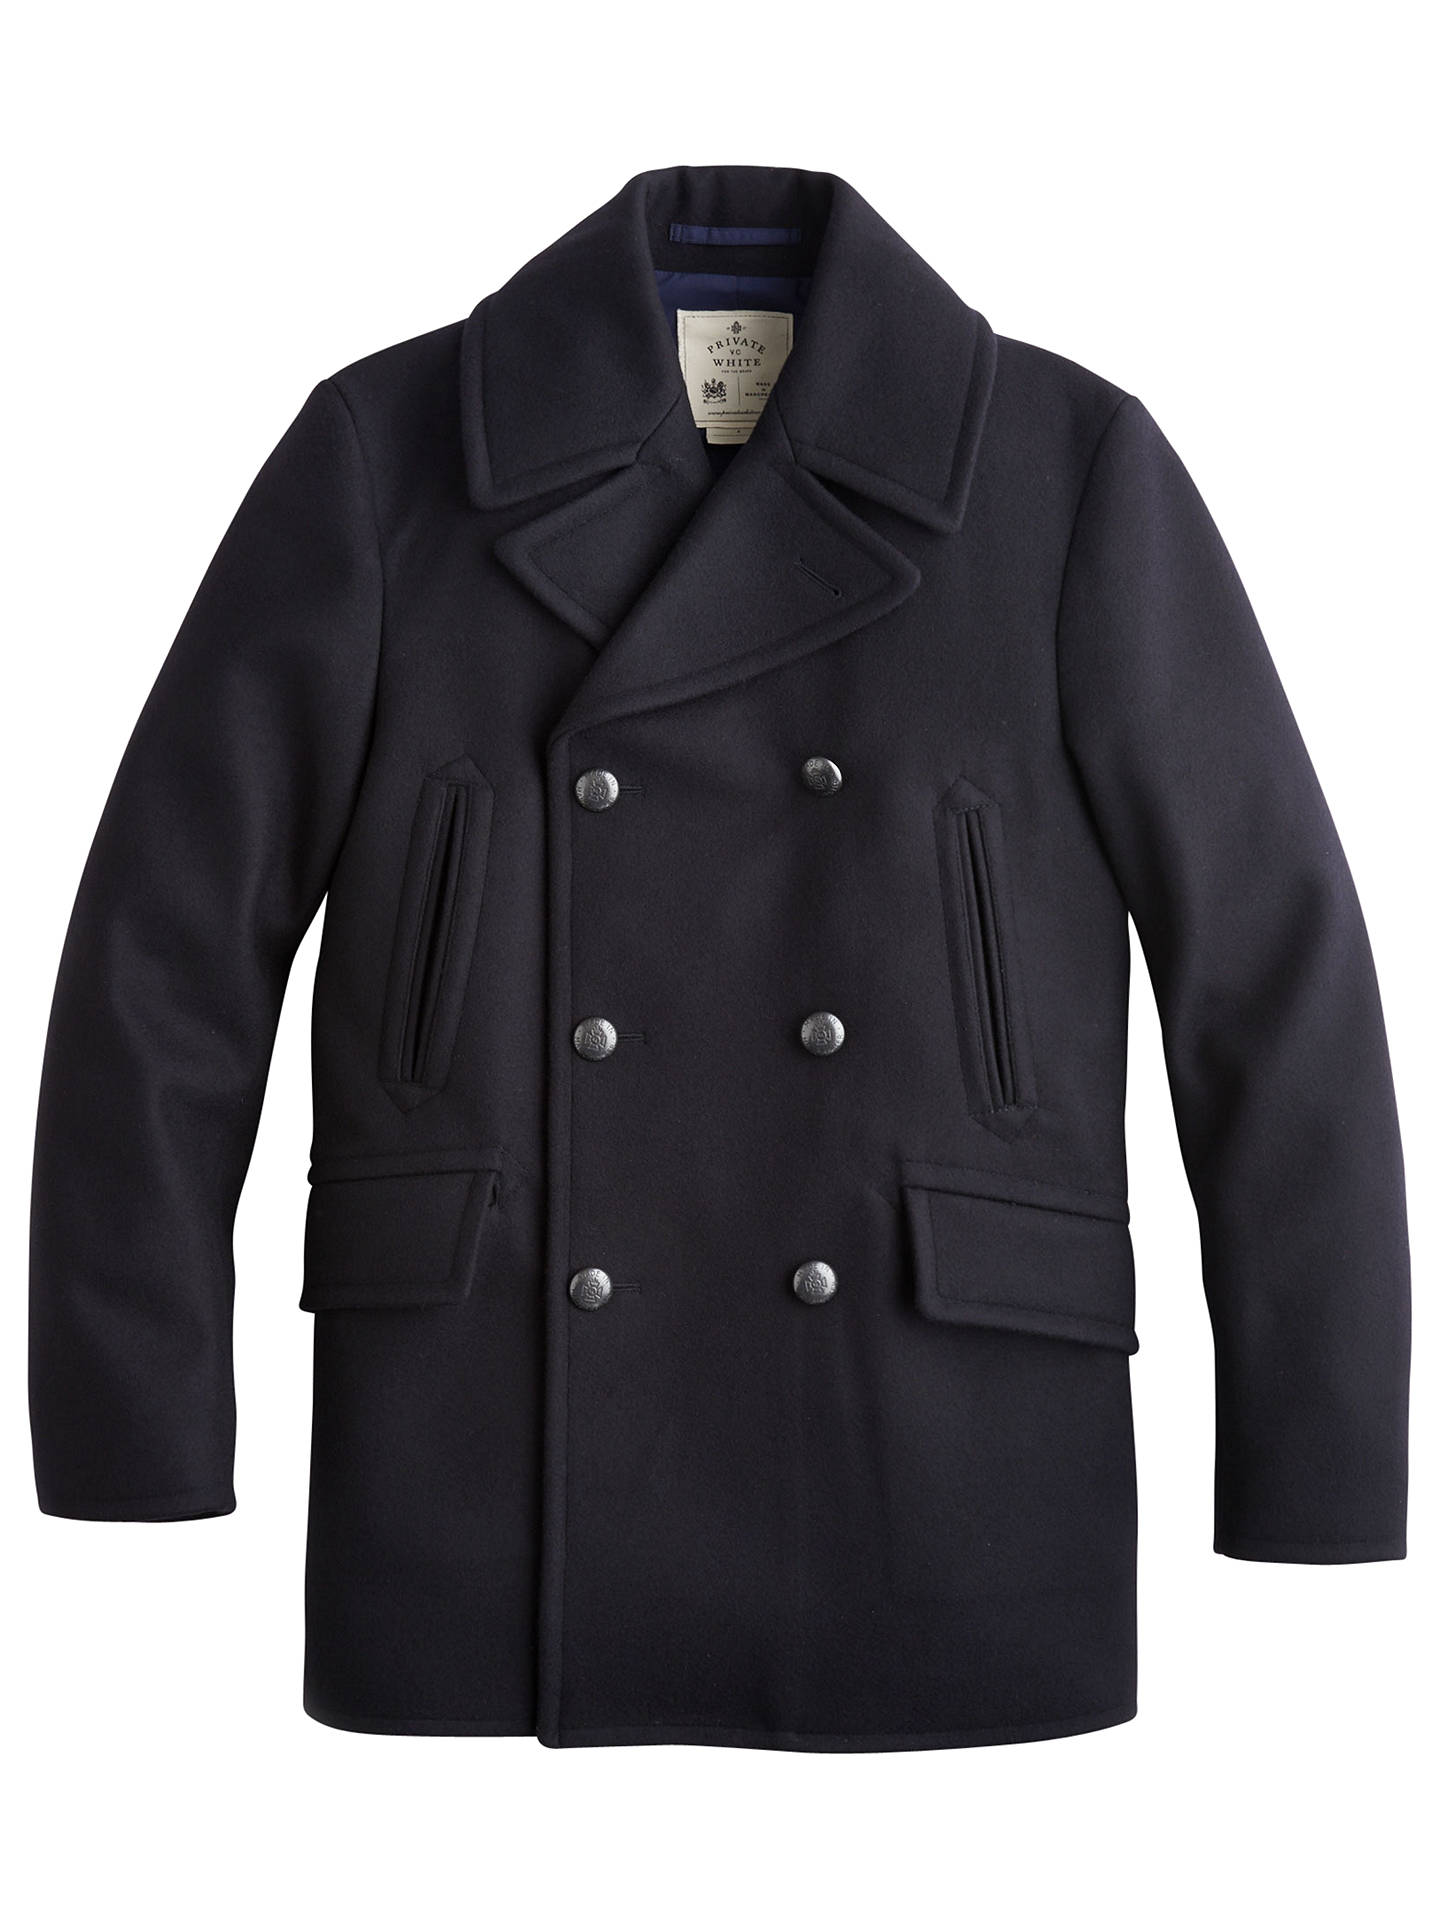 Private White V.C. Manchester Peacoat, Navy at John Lewis & Partners